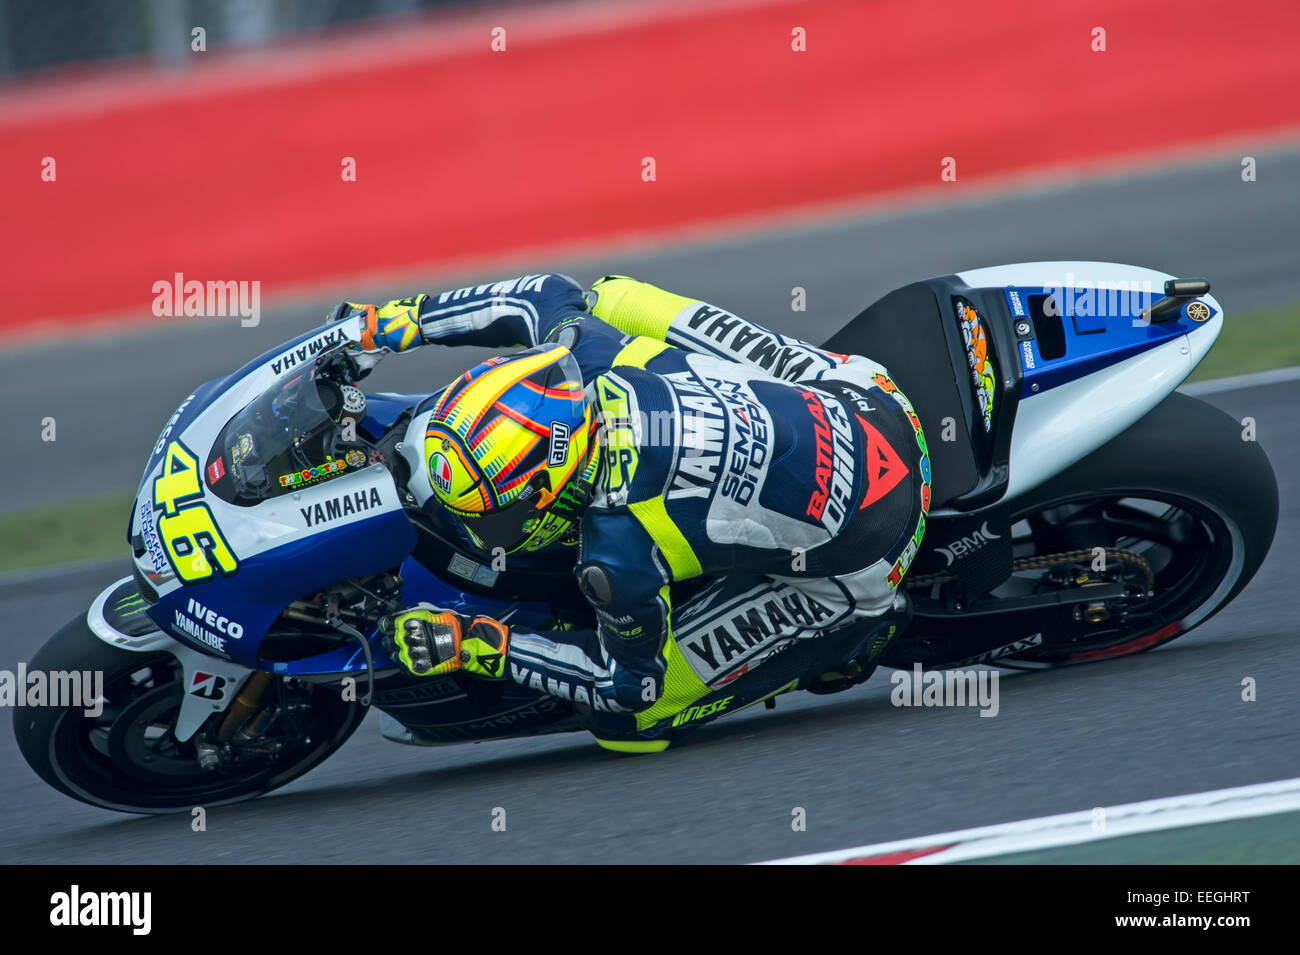 Valentino Rossi Knee Down On The Yamaha High Resolution Stock Photography  and Images - Alamy